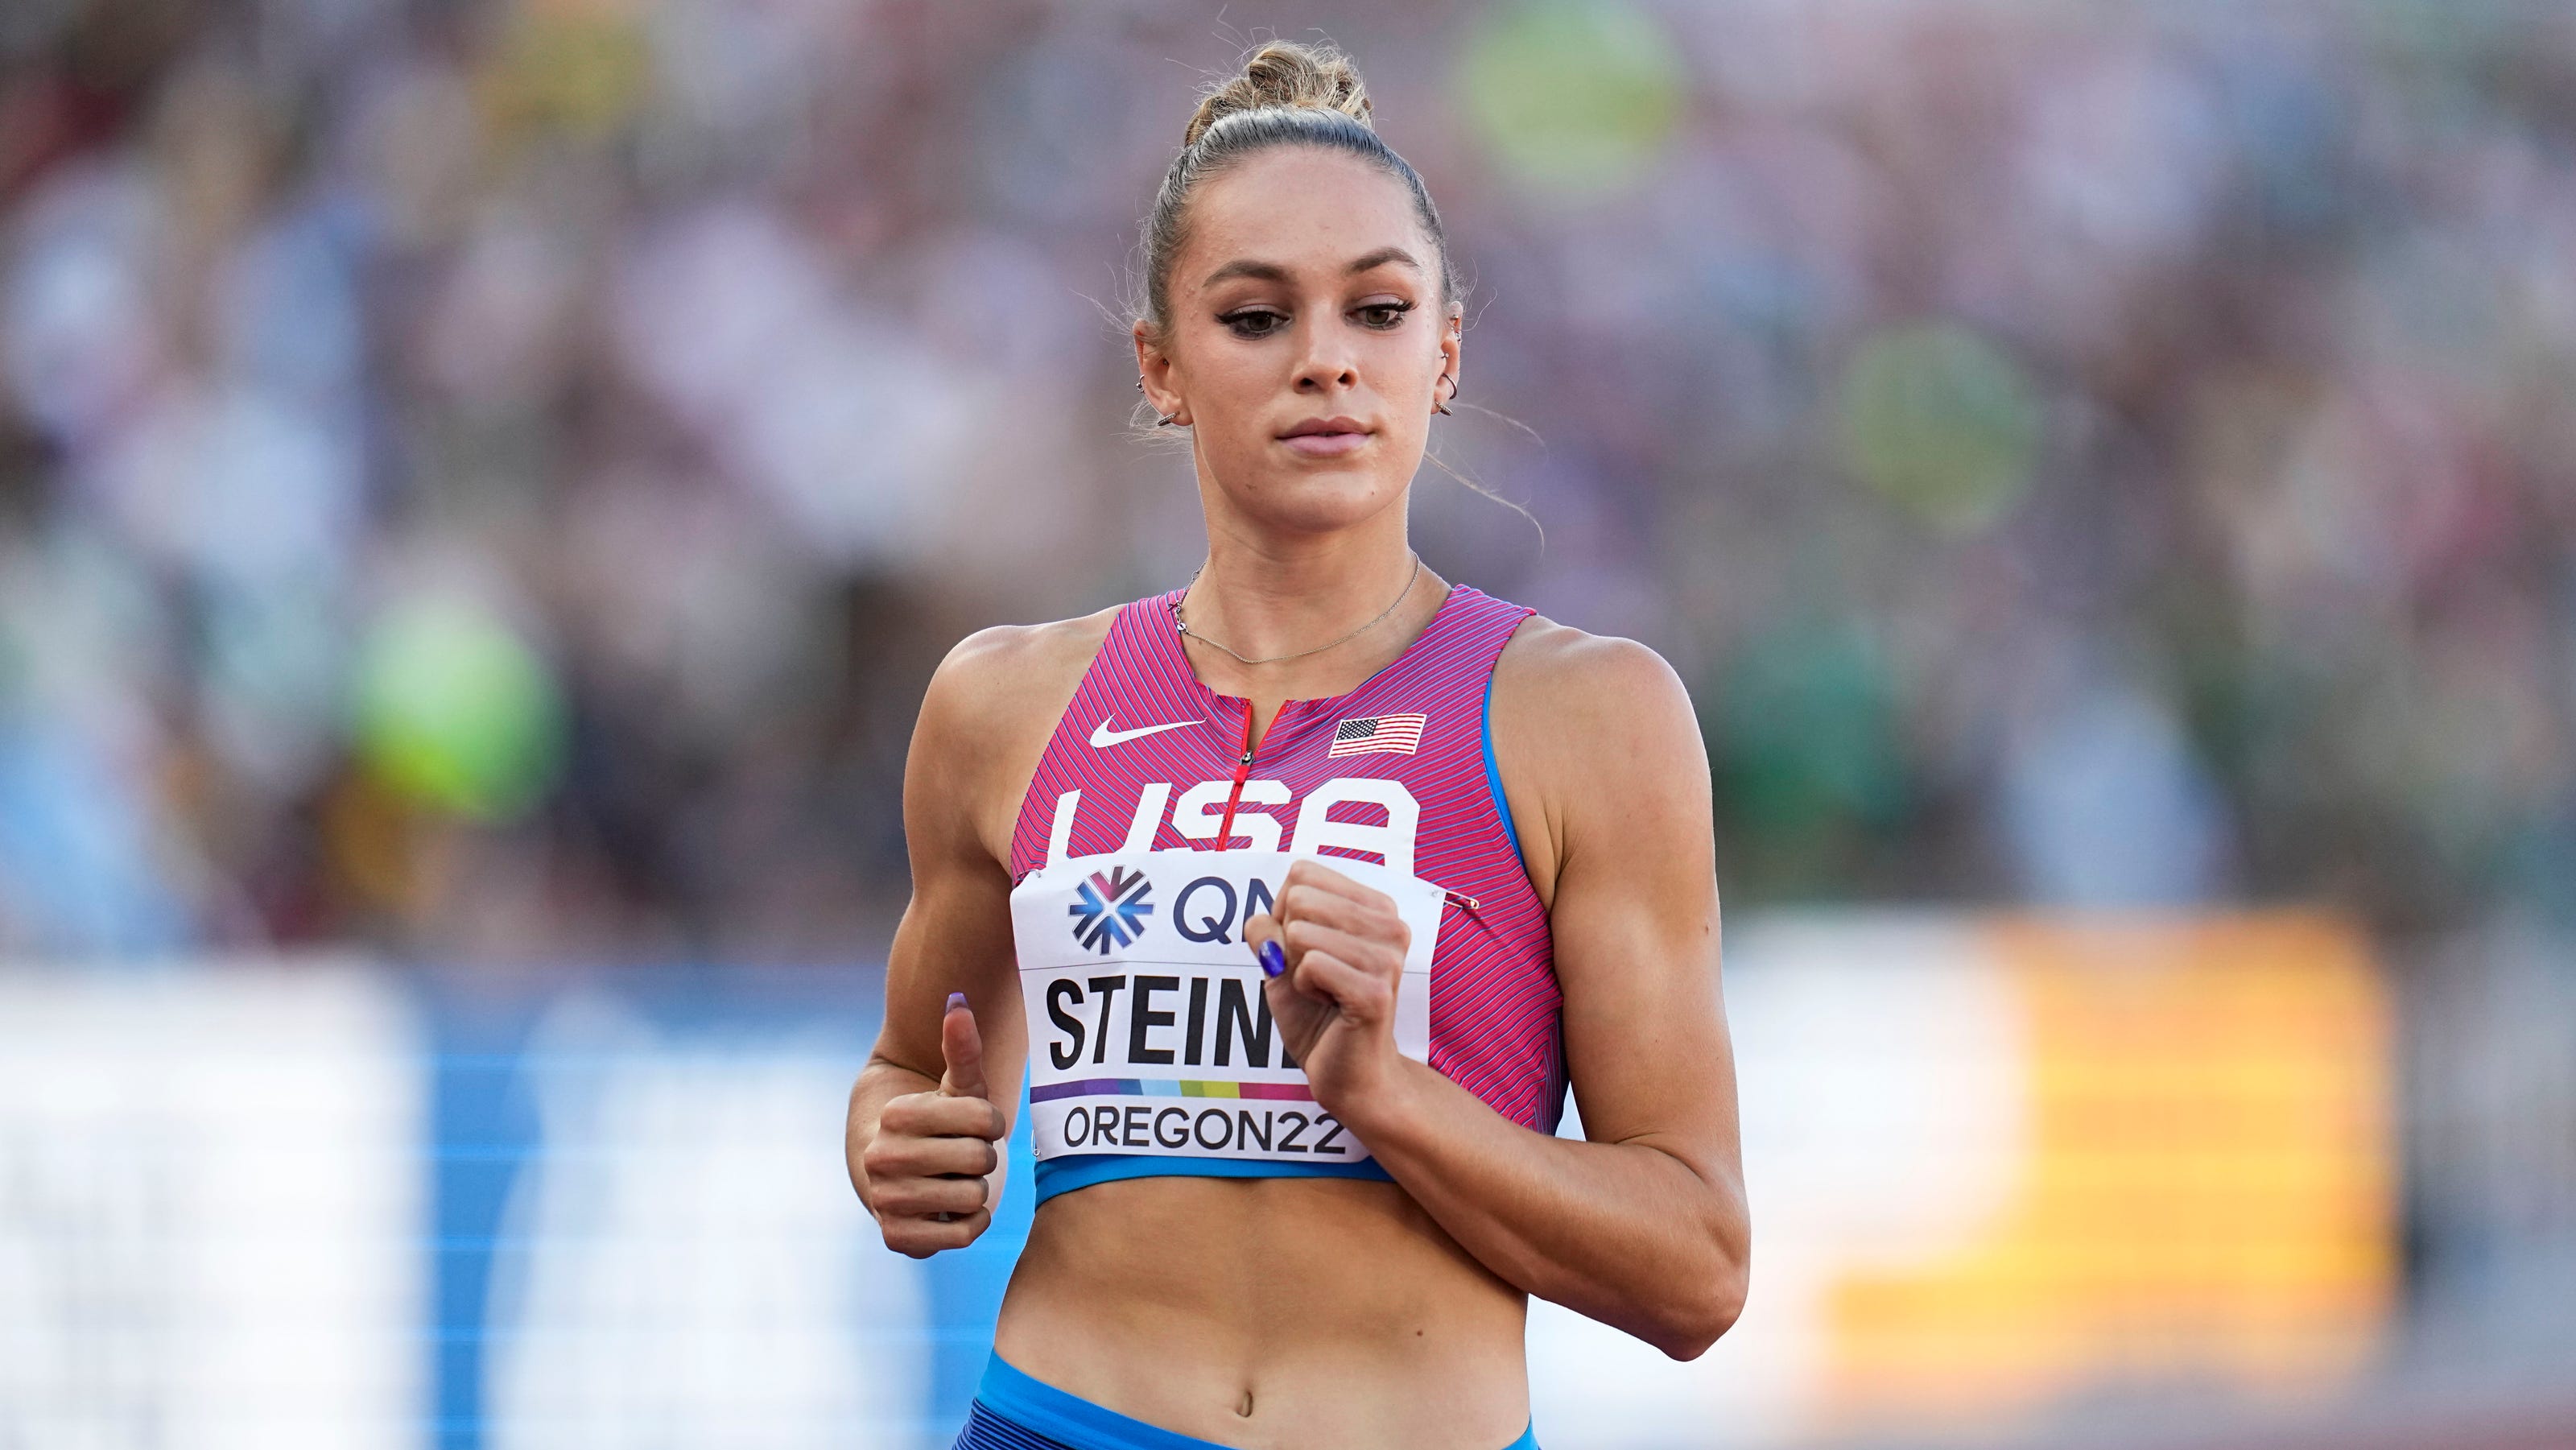 Abby Steiner How to watch Dublin Coffman grad at world championships